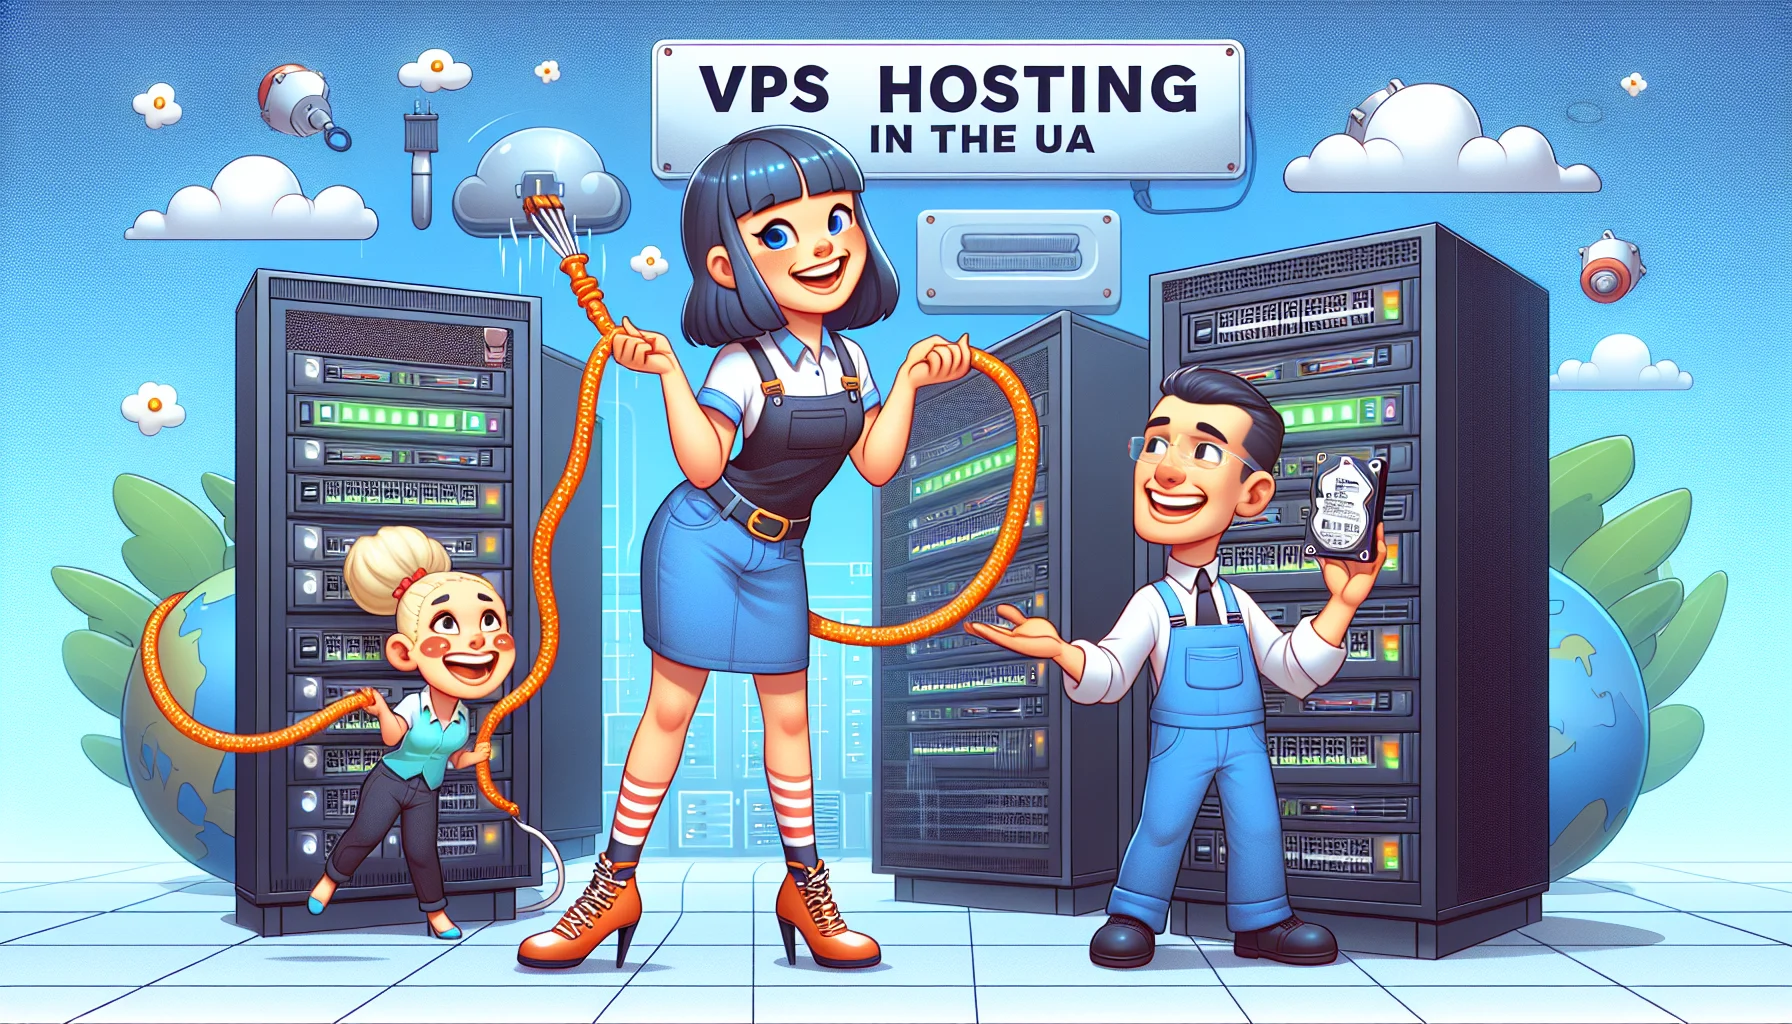 Imagine a humorous scenario taking place in a data center representing VPS hosting in the USA. There are cartoon characters interacting in this tech environment. One is a friendly-looking, tall Asian female technician with a big smile, holding a network cable that playfully looks like a lasso. Another is a quirky Caucasian male manager holding a hard drive like it's a valuable treasure. They're surrounded by servers and networking equipment that are comically personified, having friendly faces and acting like they're part of the fun. All elements come together in a lively and enticing representation of web hosting.